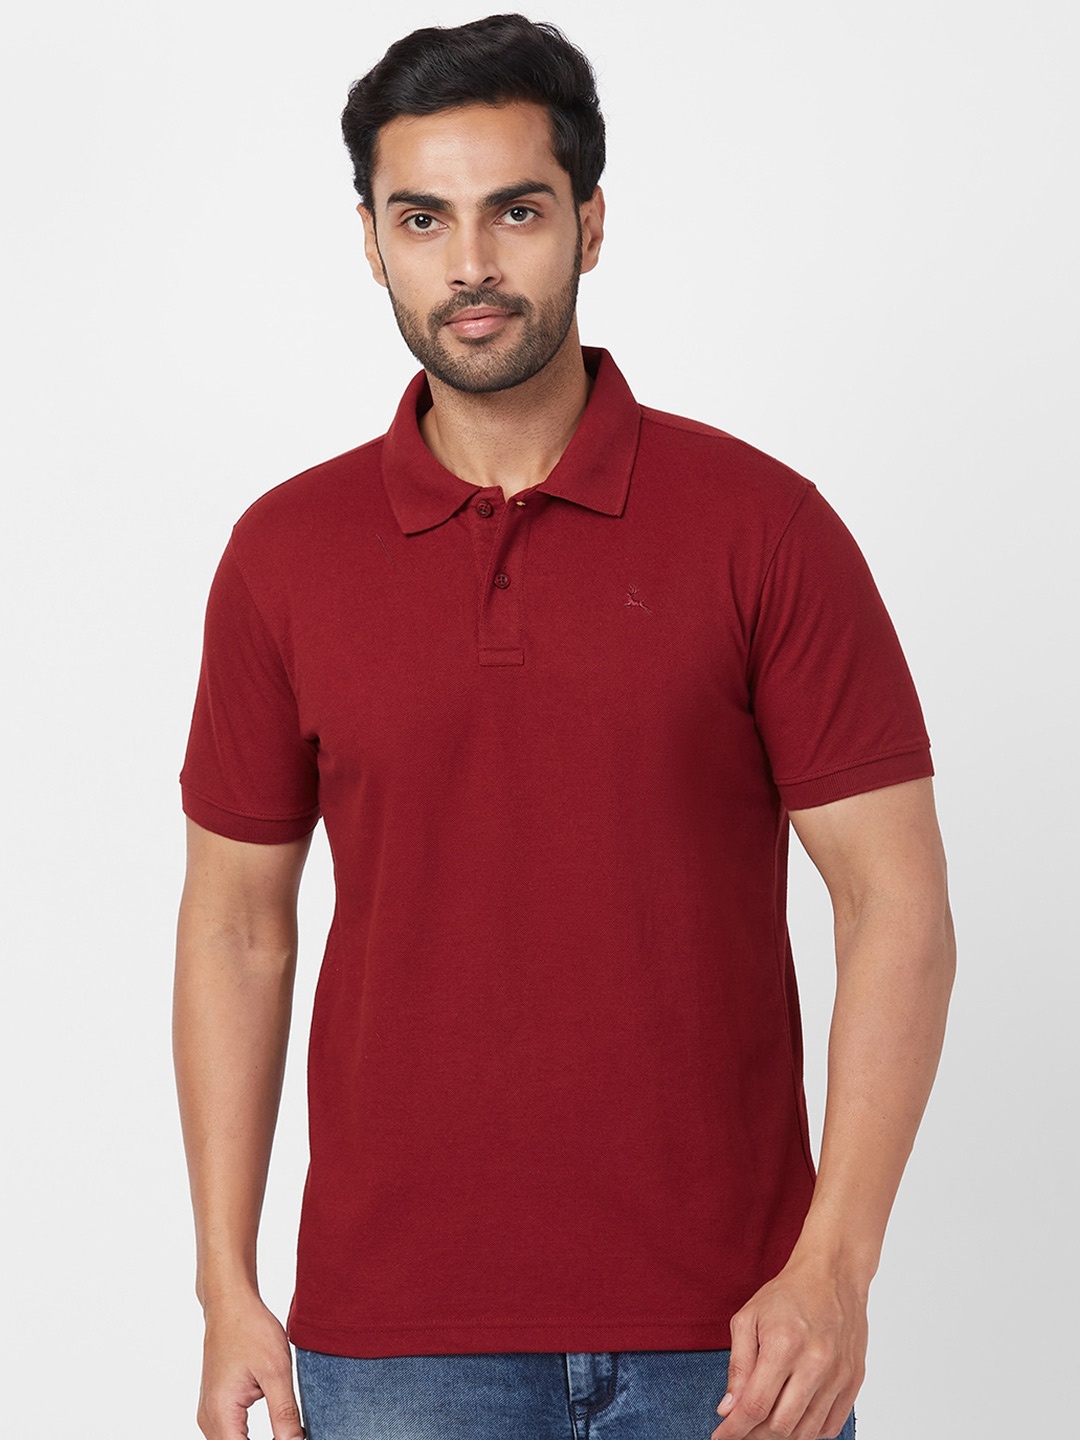 

Parx Polo Collar Short Sleeves T-shirt, Red